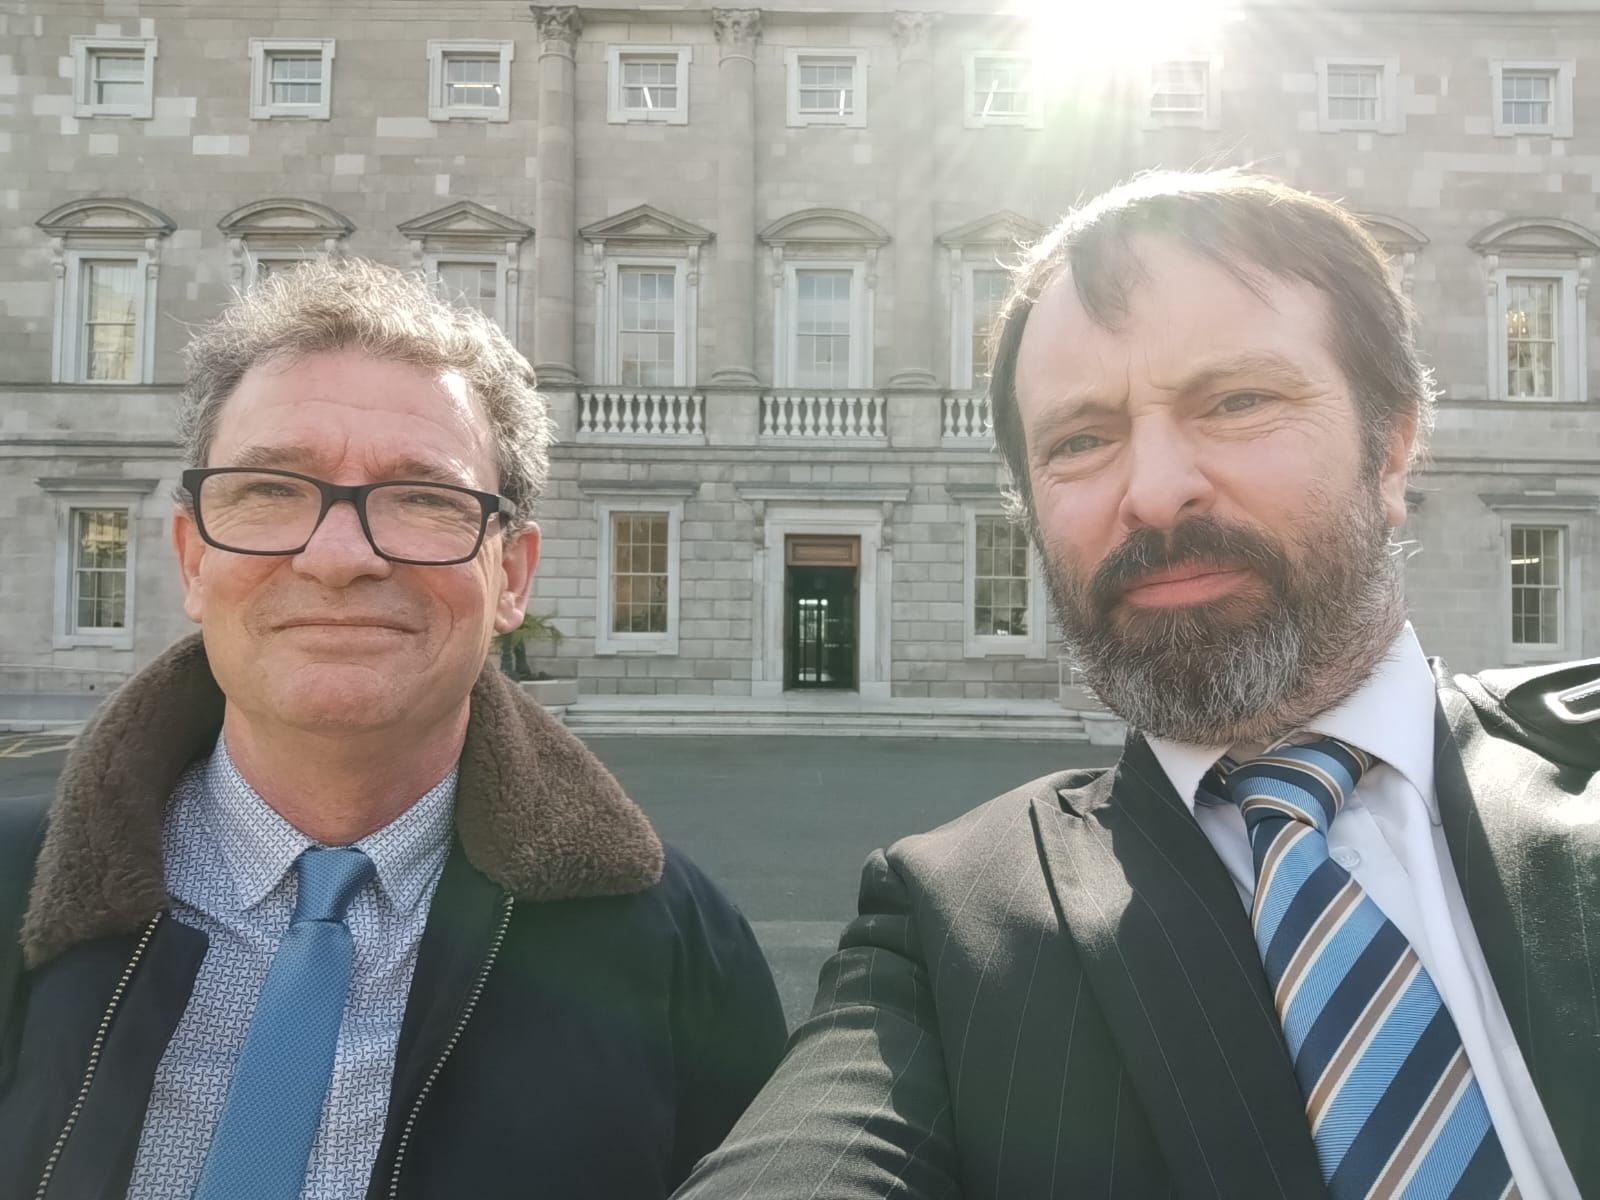 Leinster House meeting with Darren O Rourke and Martin Kenny